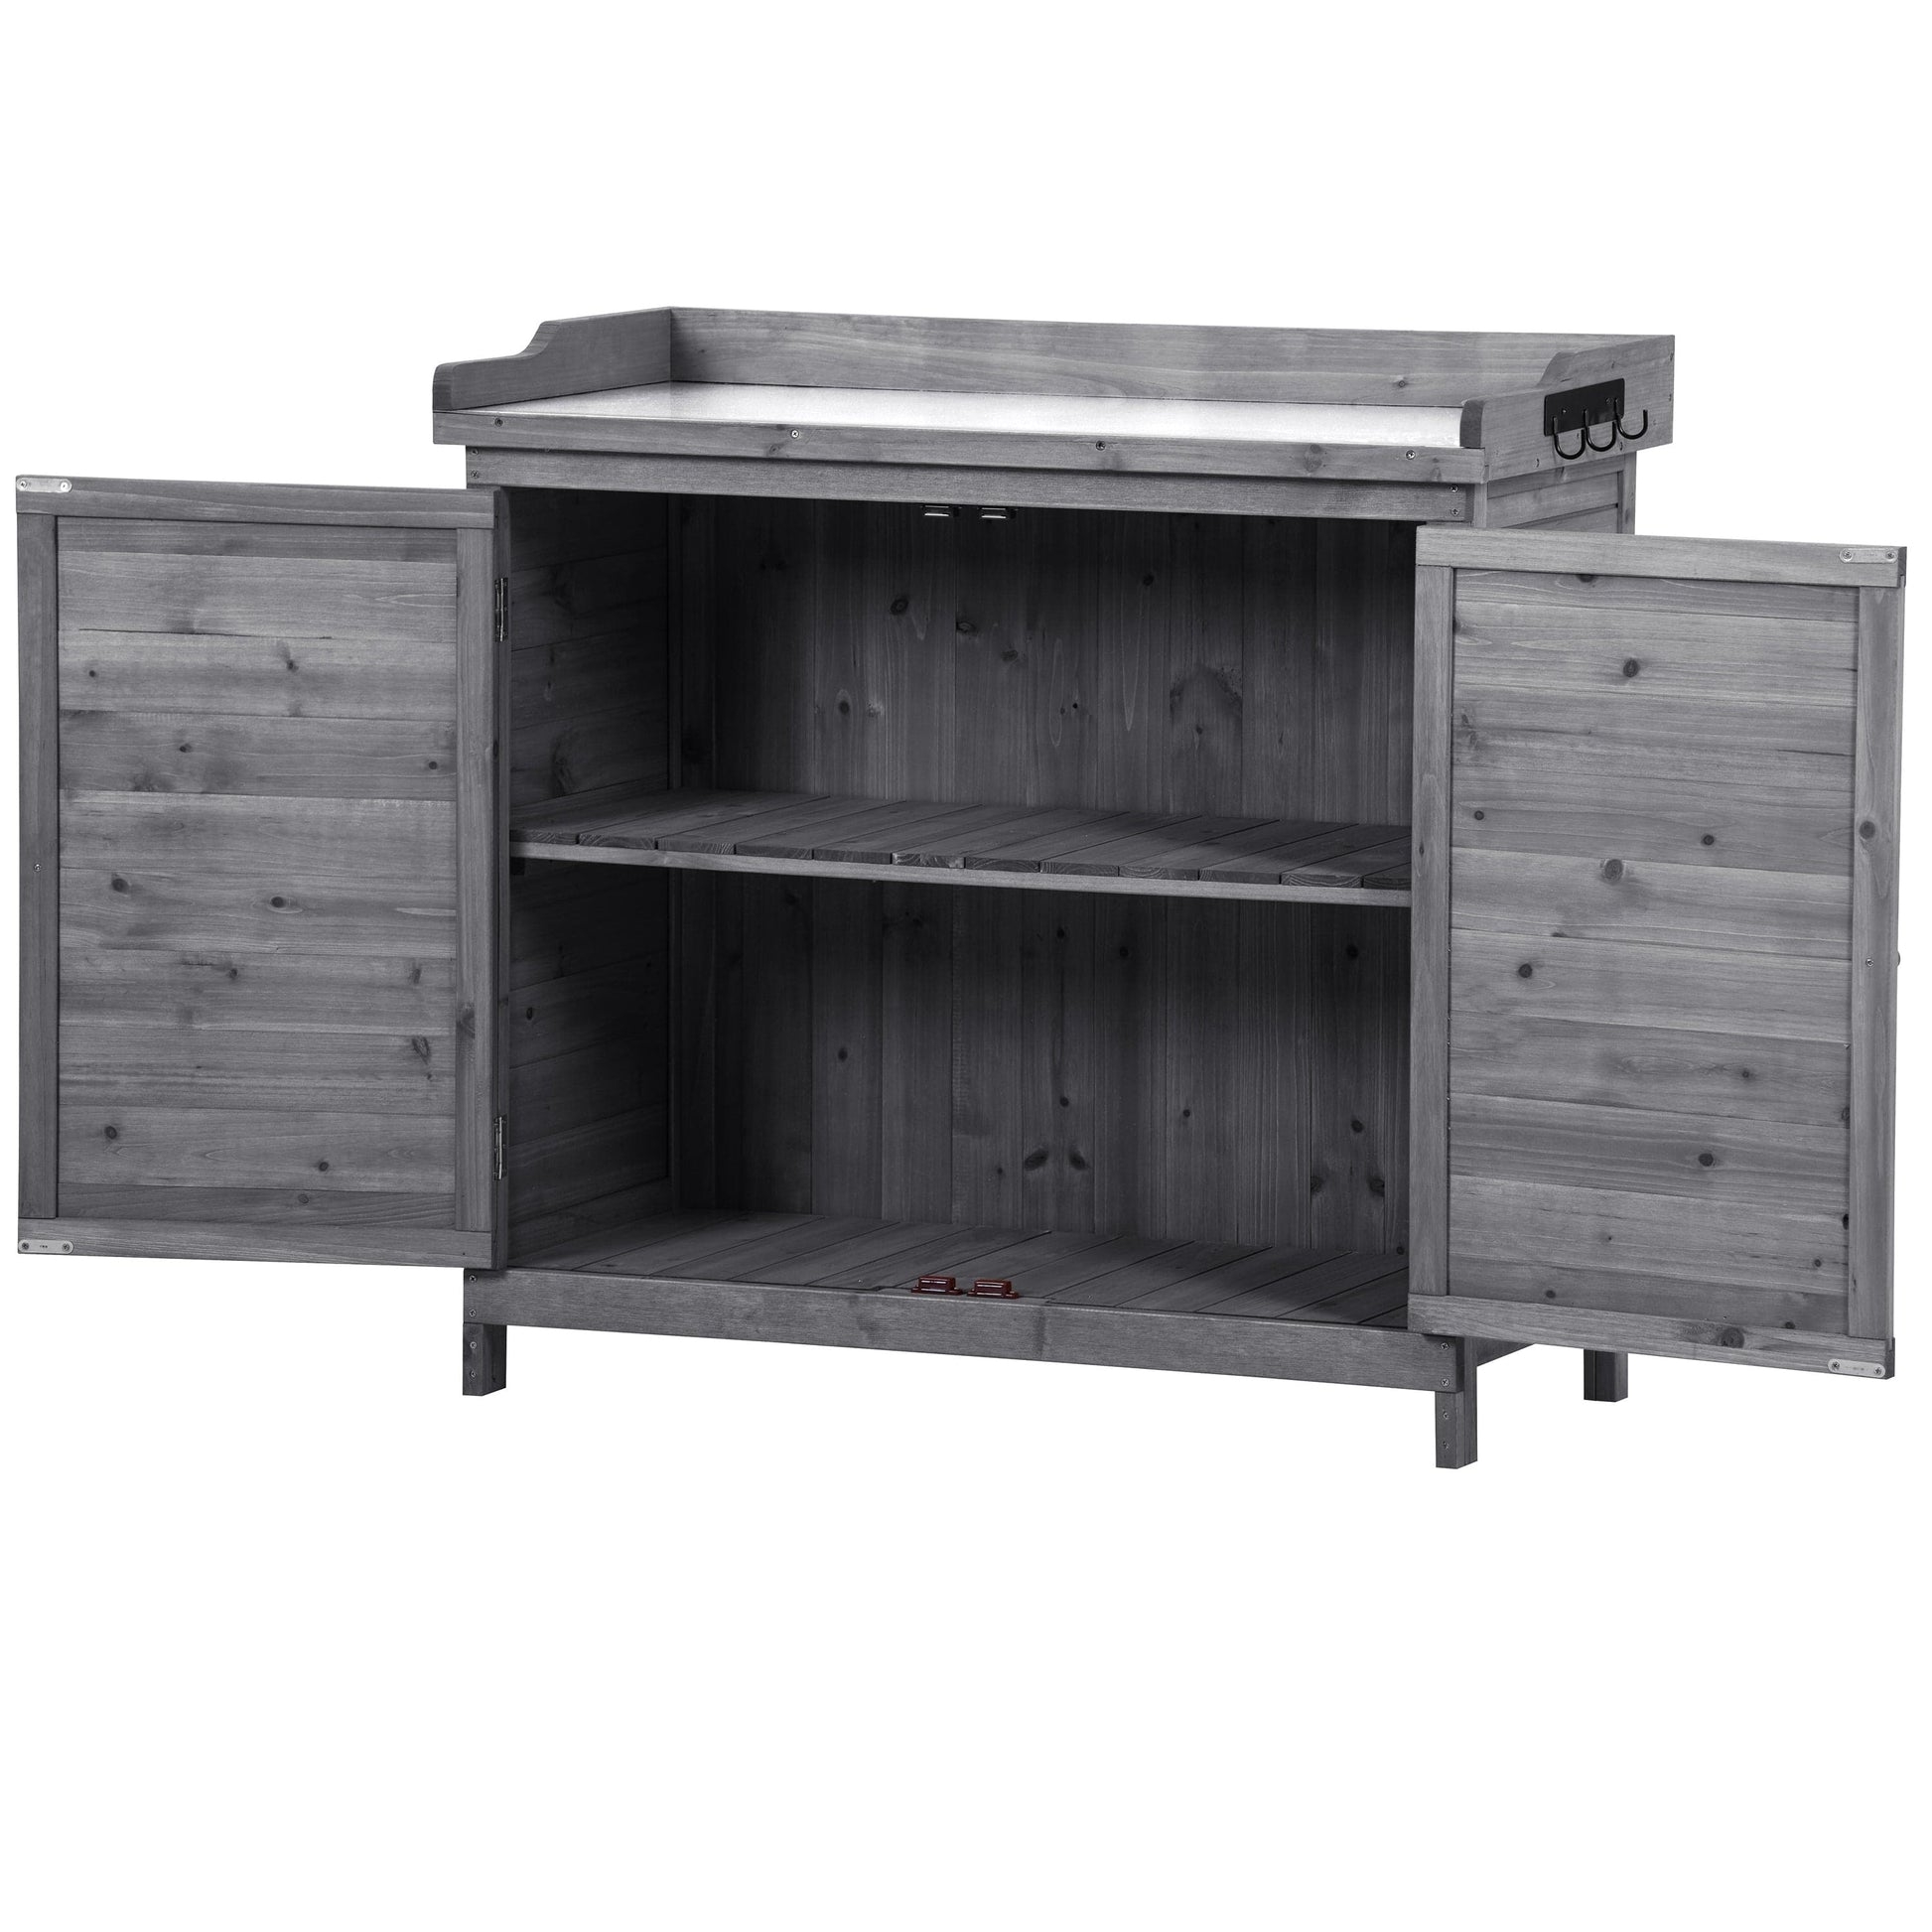 1st Choice Furniture Direct Potting Bench 1st Choice 39" Rustic Potting Bench - Wood Workstation with Storage